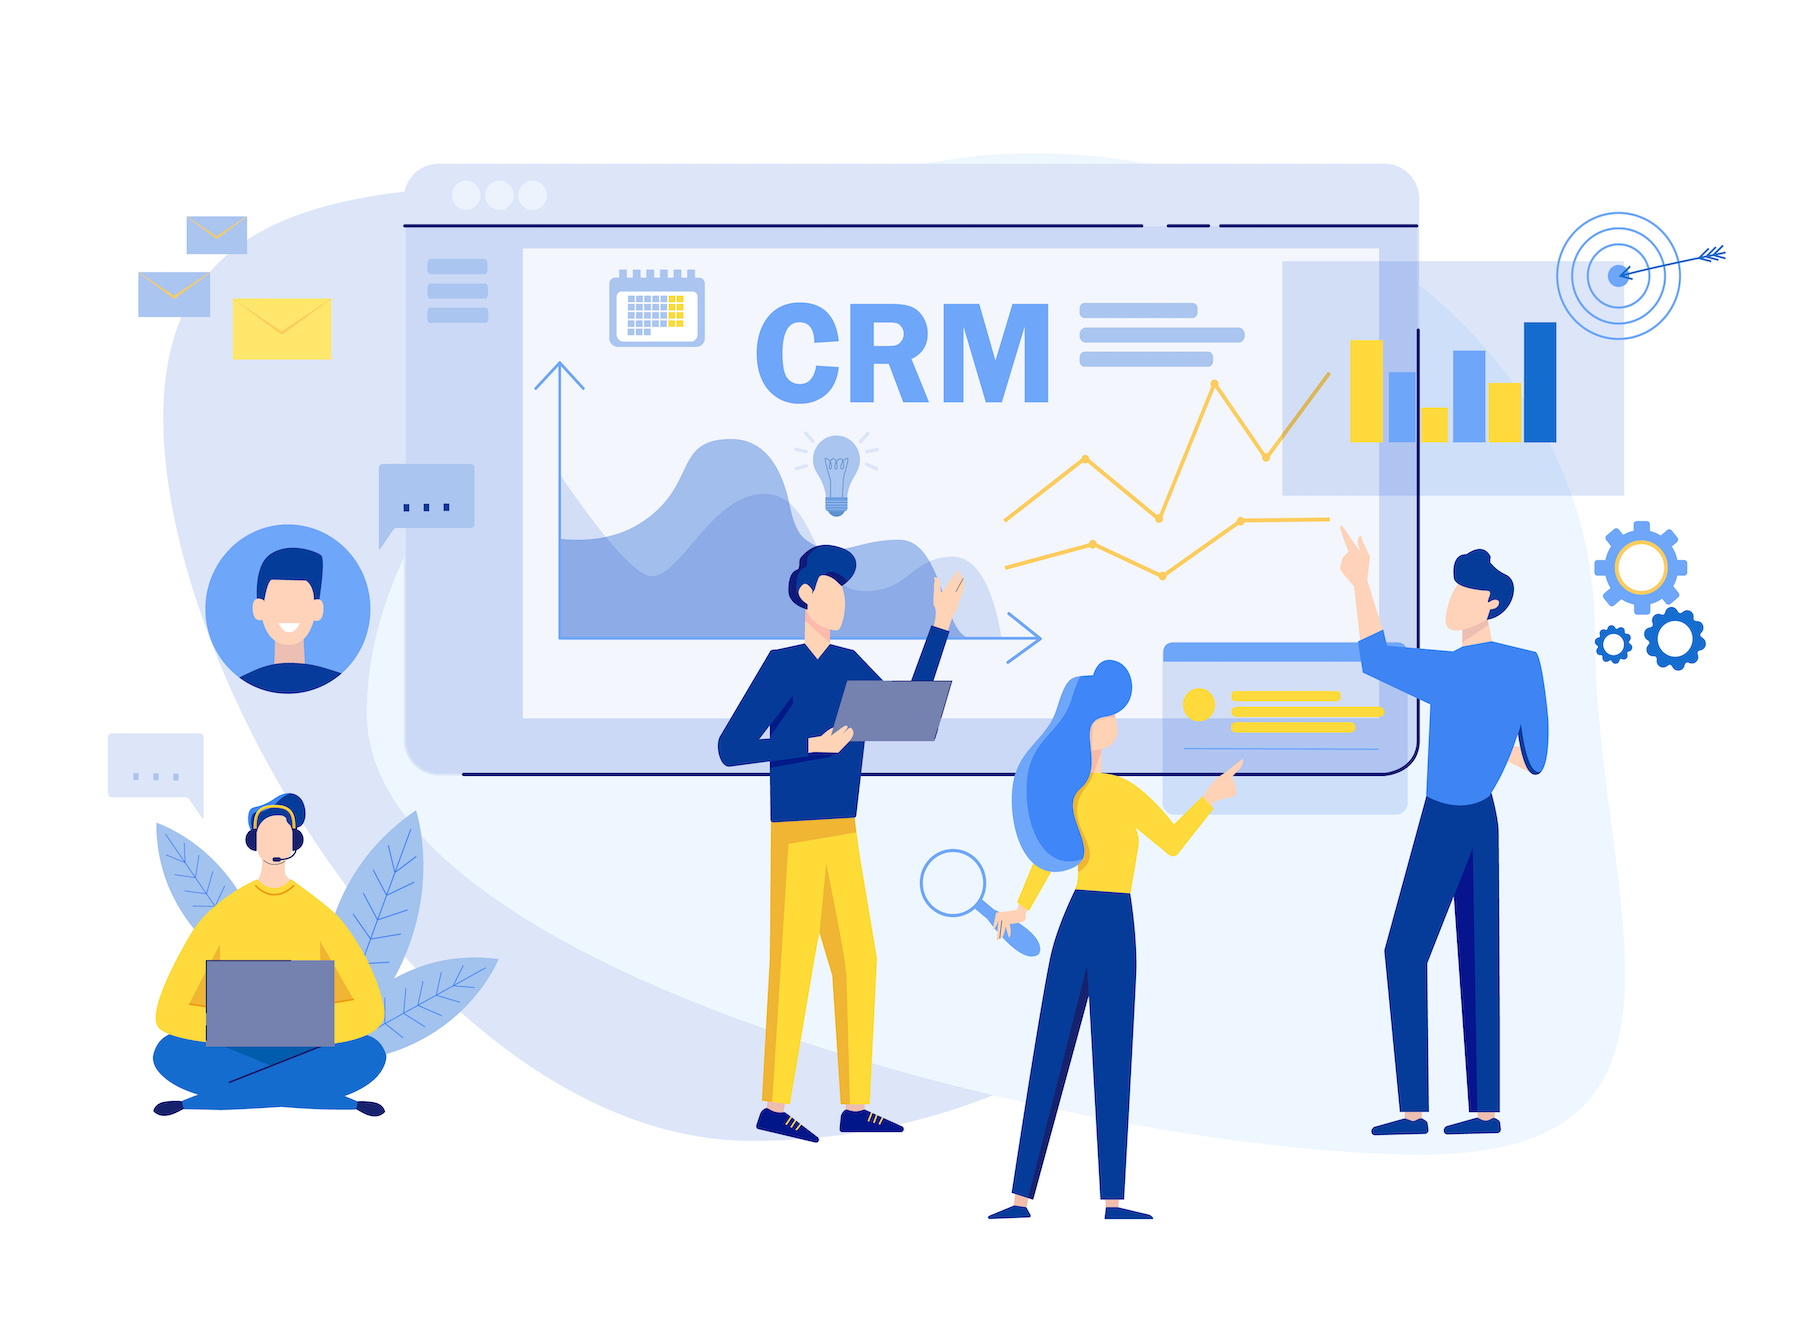 5 Tips for Getting the Most out of your CRM Software